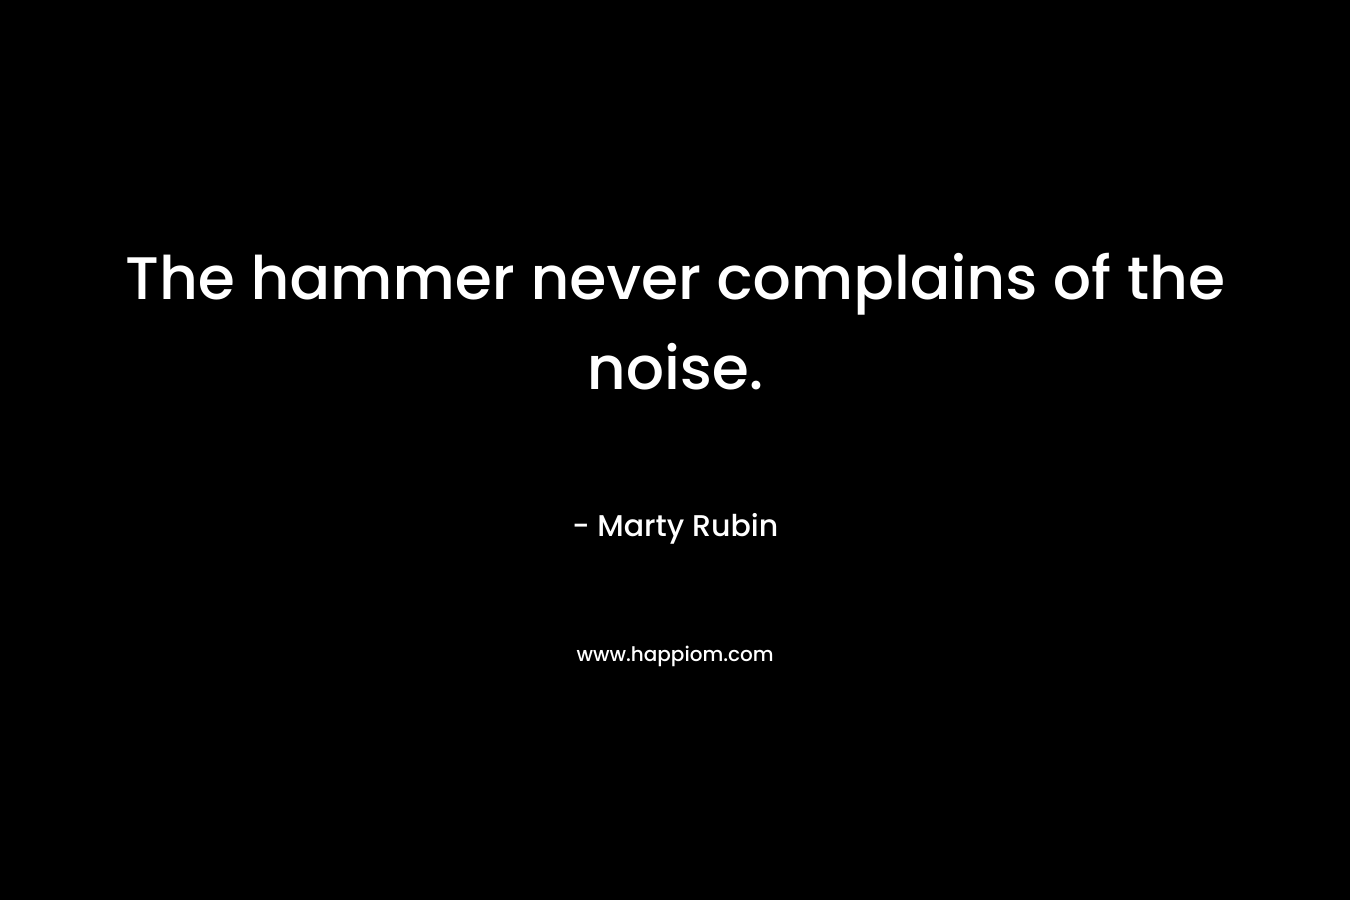 The hammer never complains of the noise.